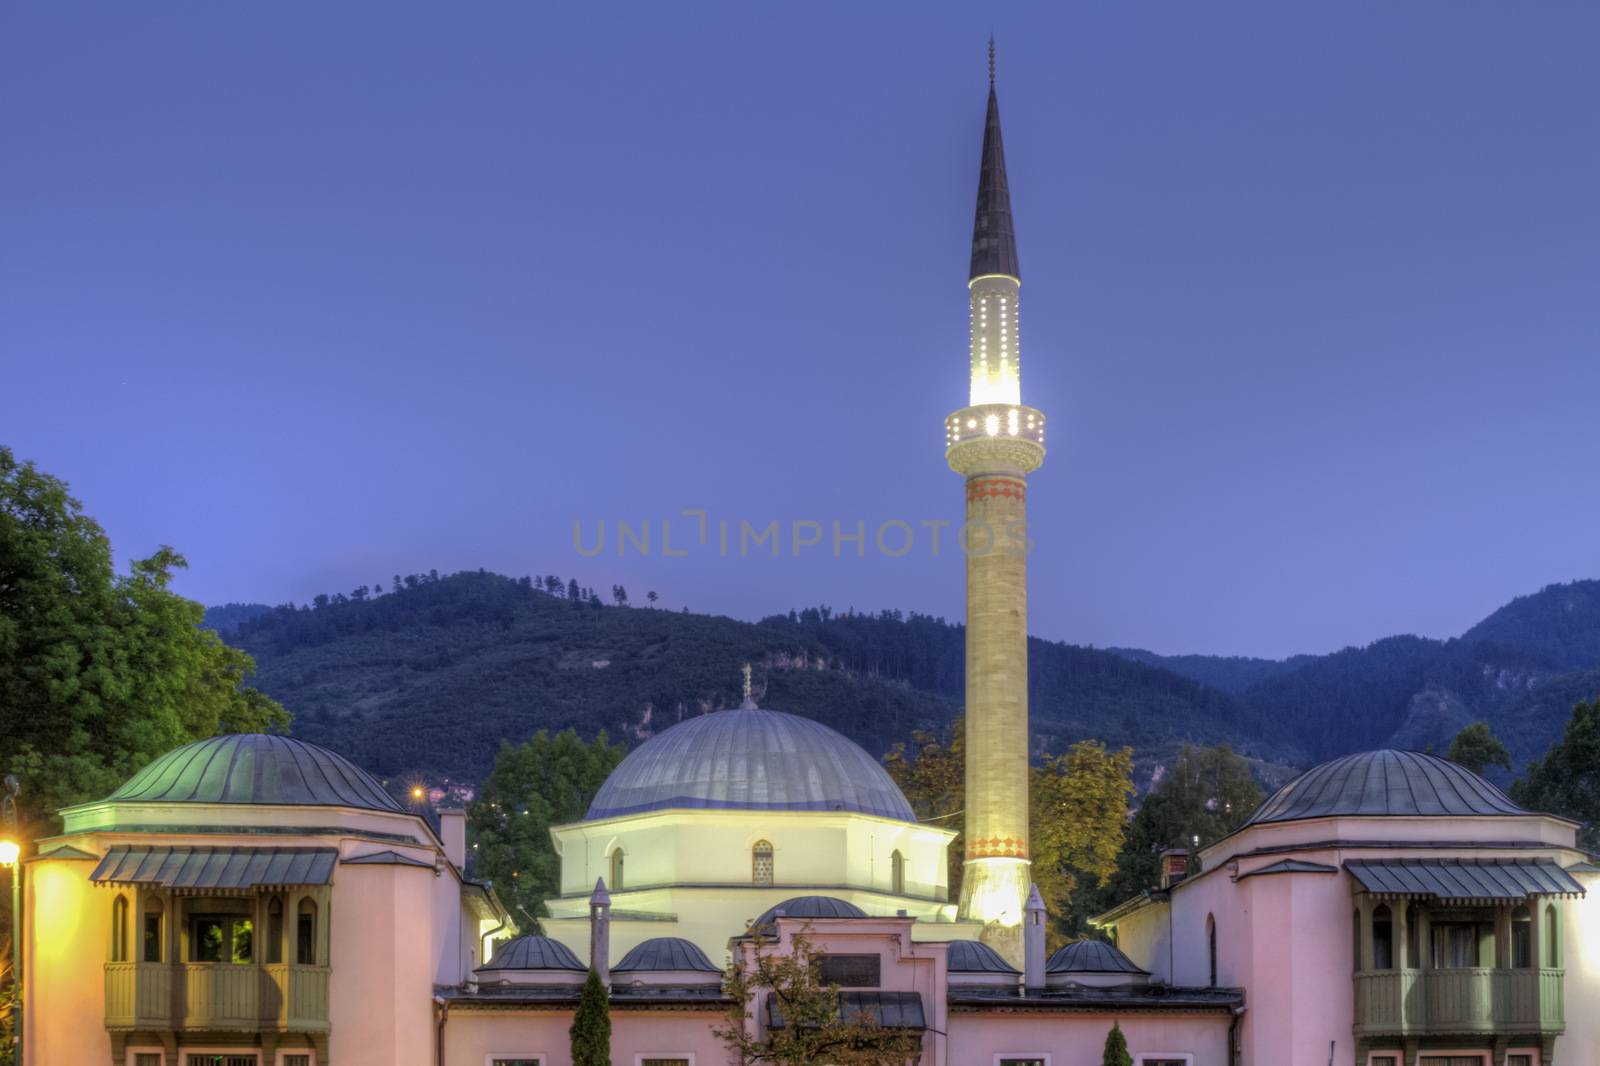 Emperor's Mosque in Sarajevo on the banks of the Milyacka River by night, Bosnia and Herzegovina